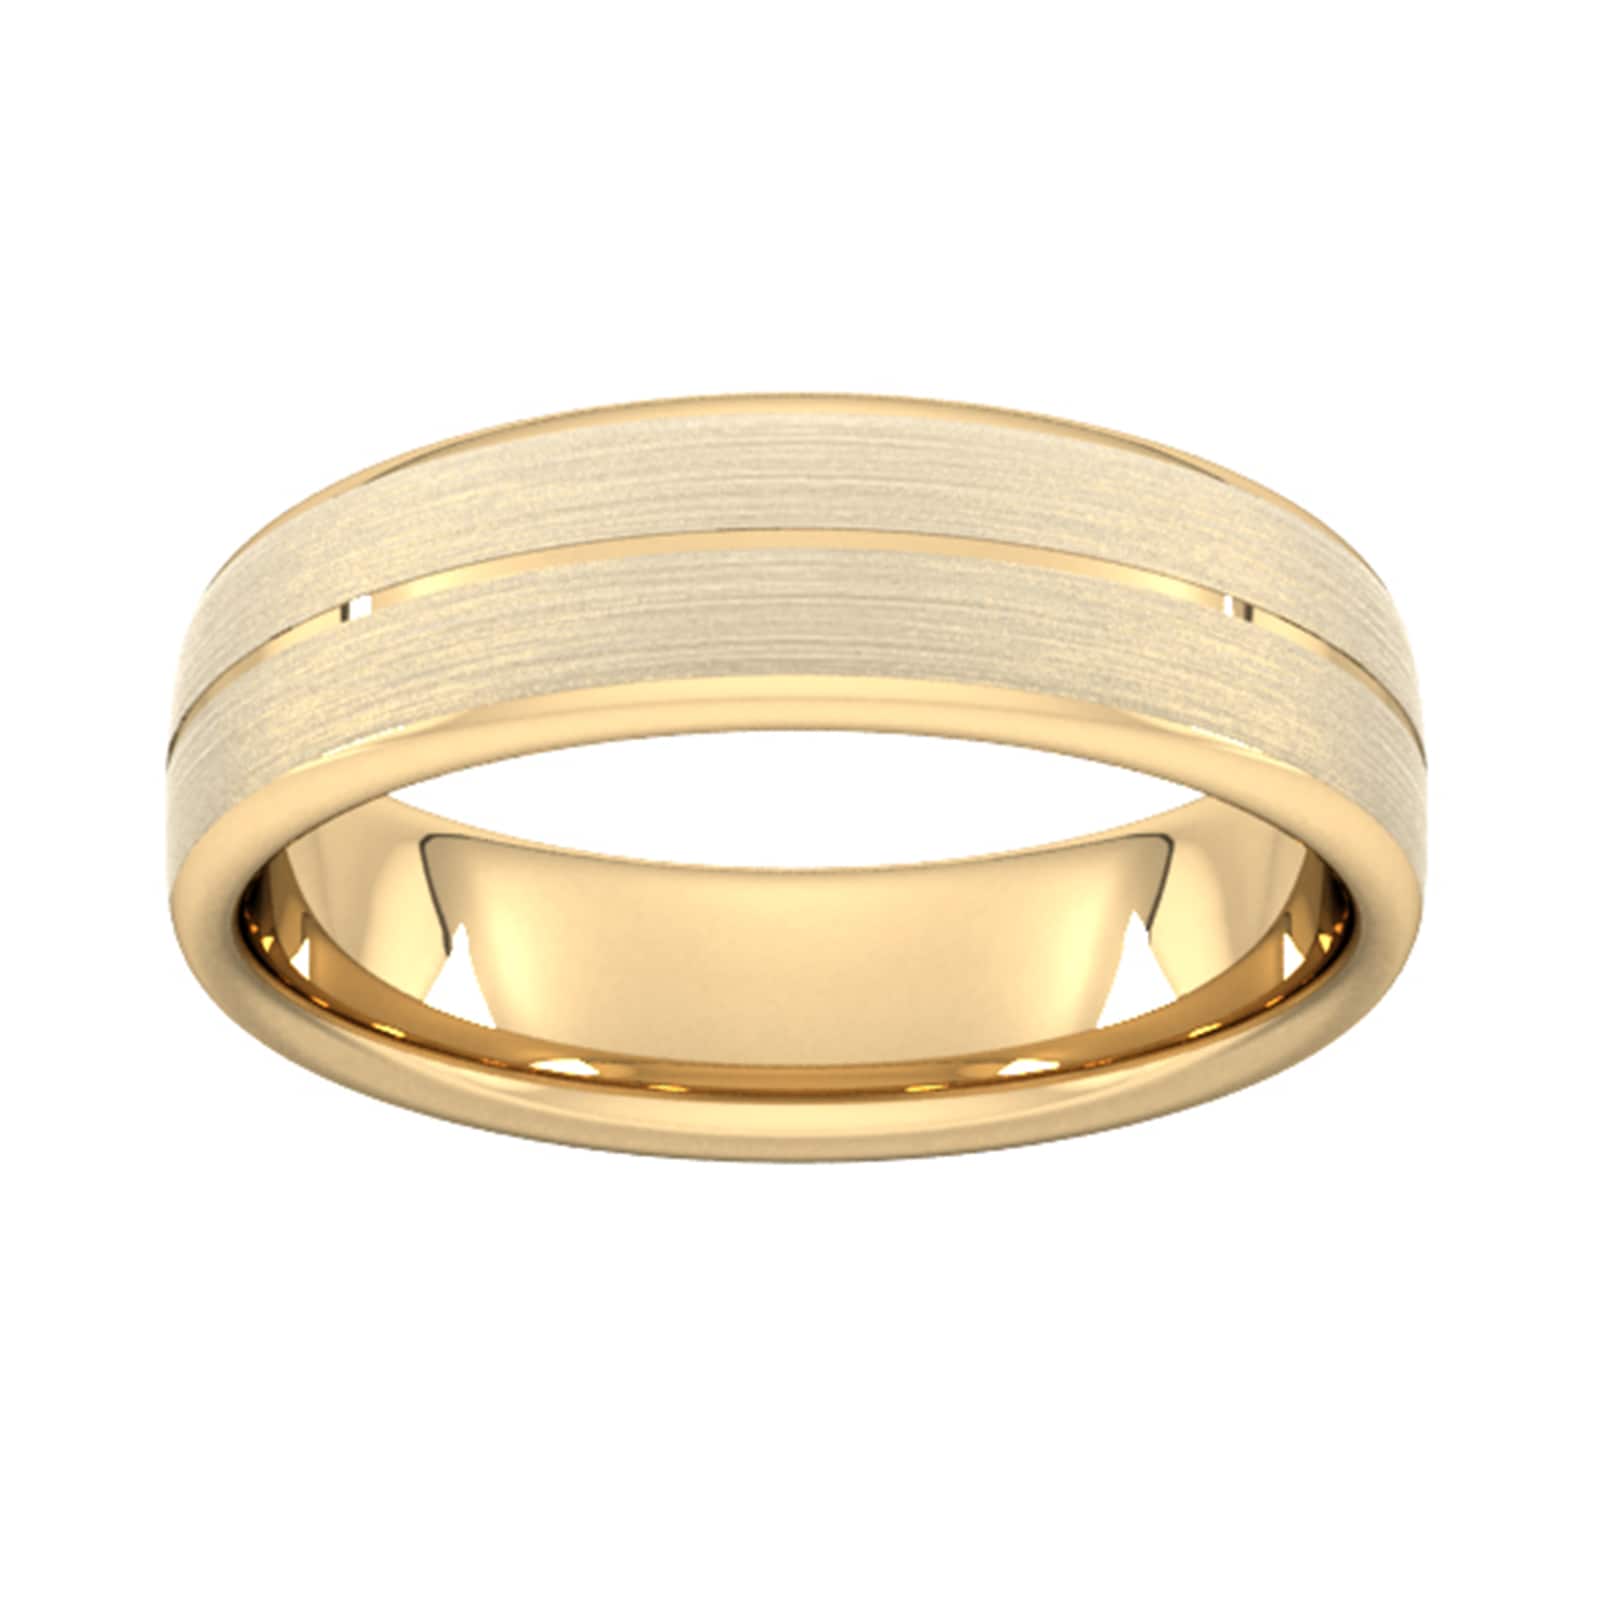 6mm D Shape Standard Centre Groove With Chamfered Edge Wedding Ring In 9 Carat Yellow Gold - Ring Size Z